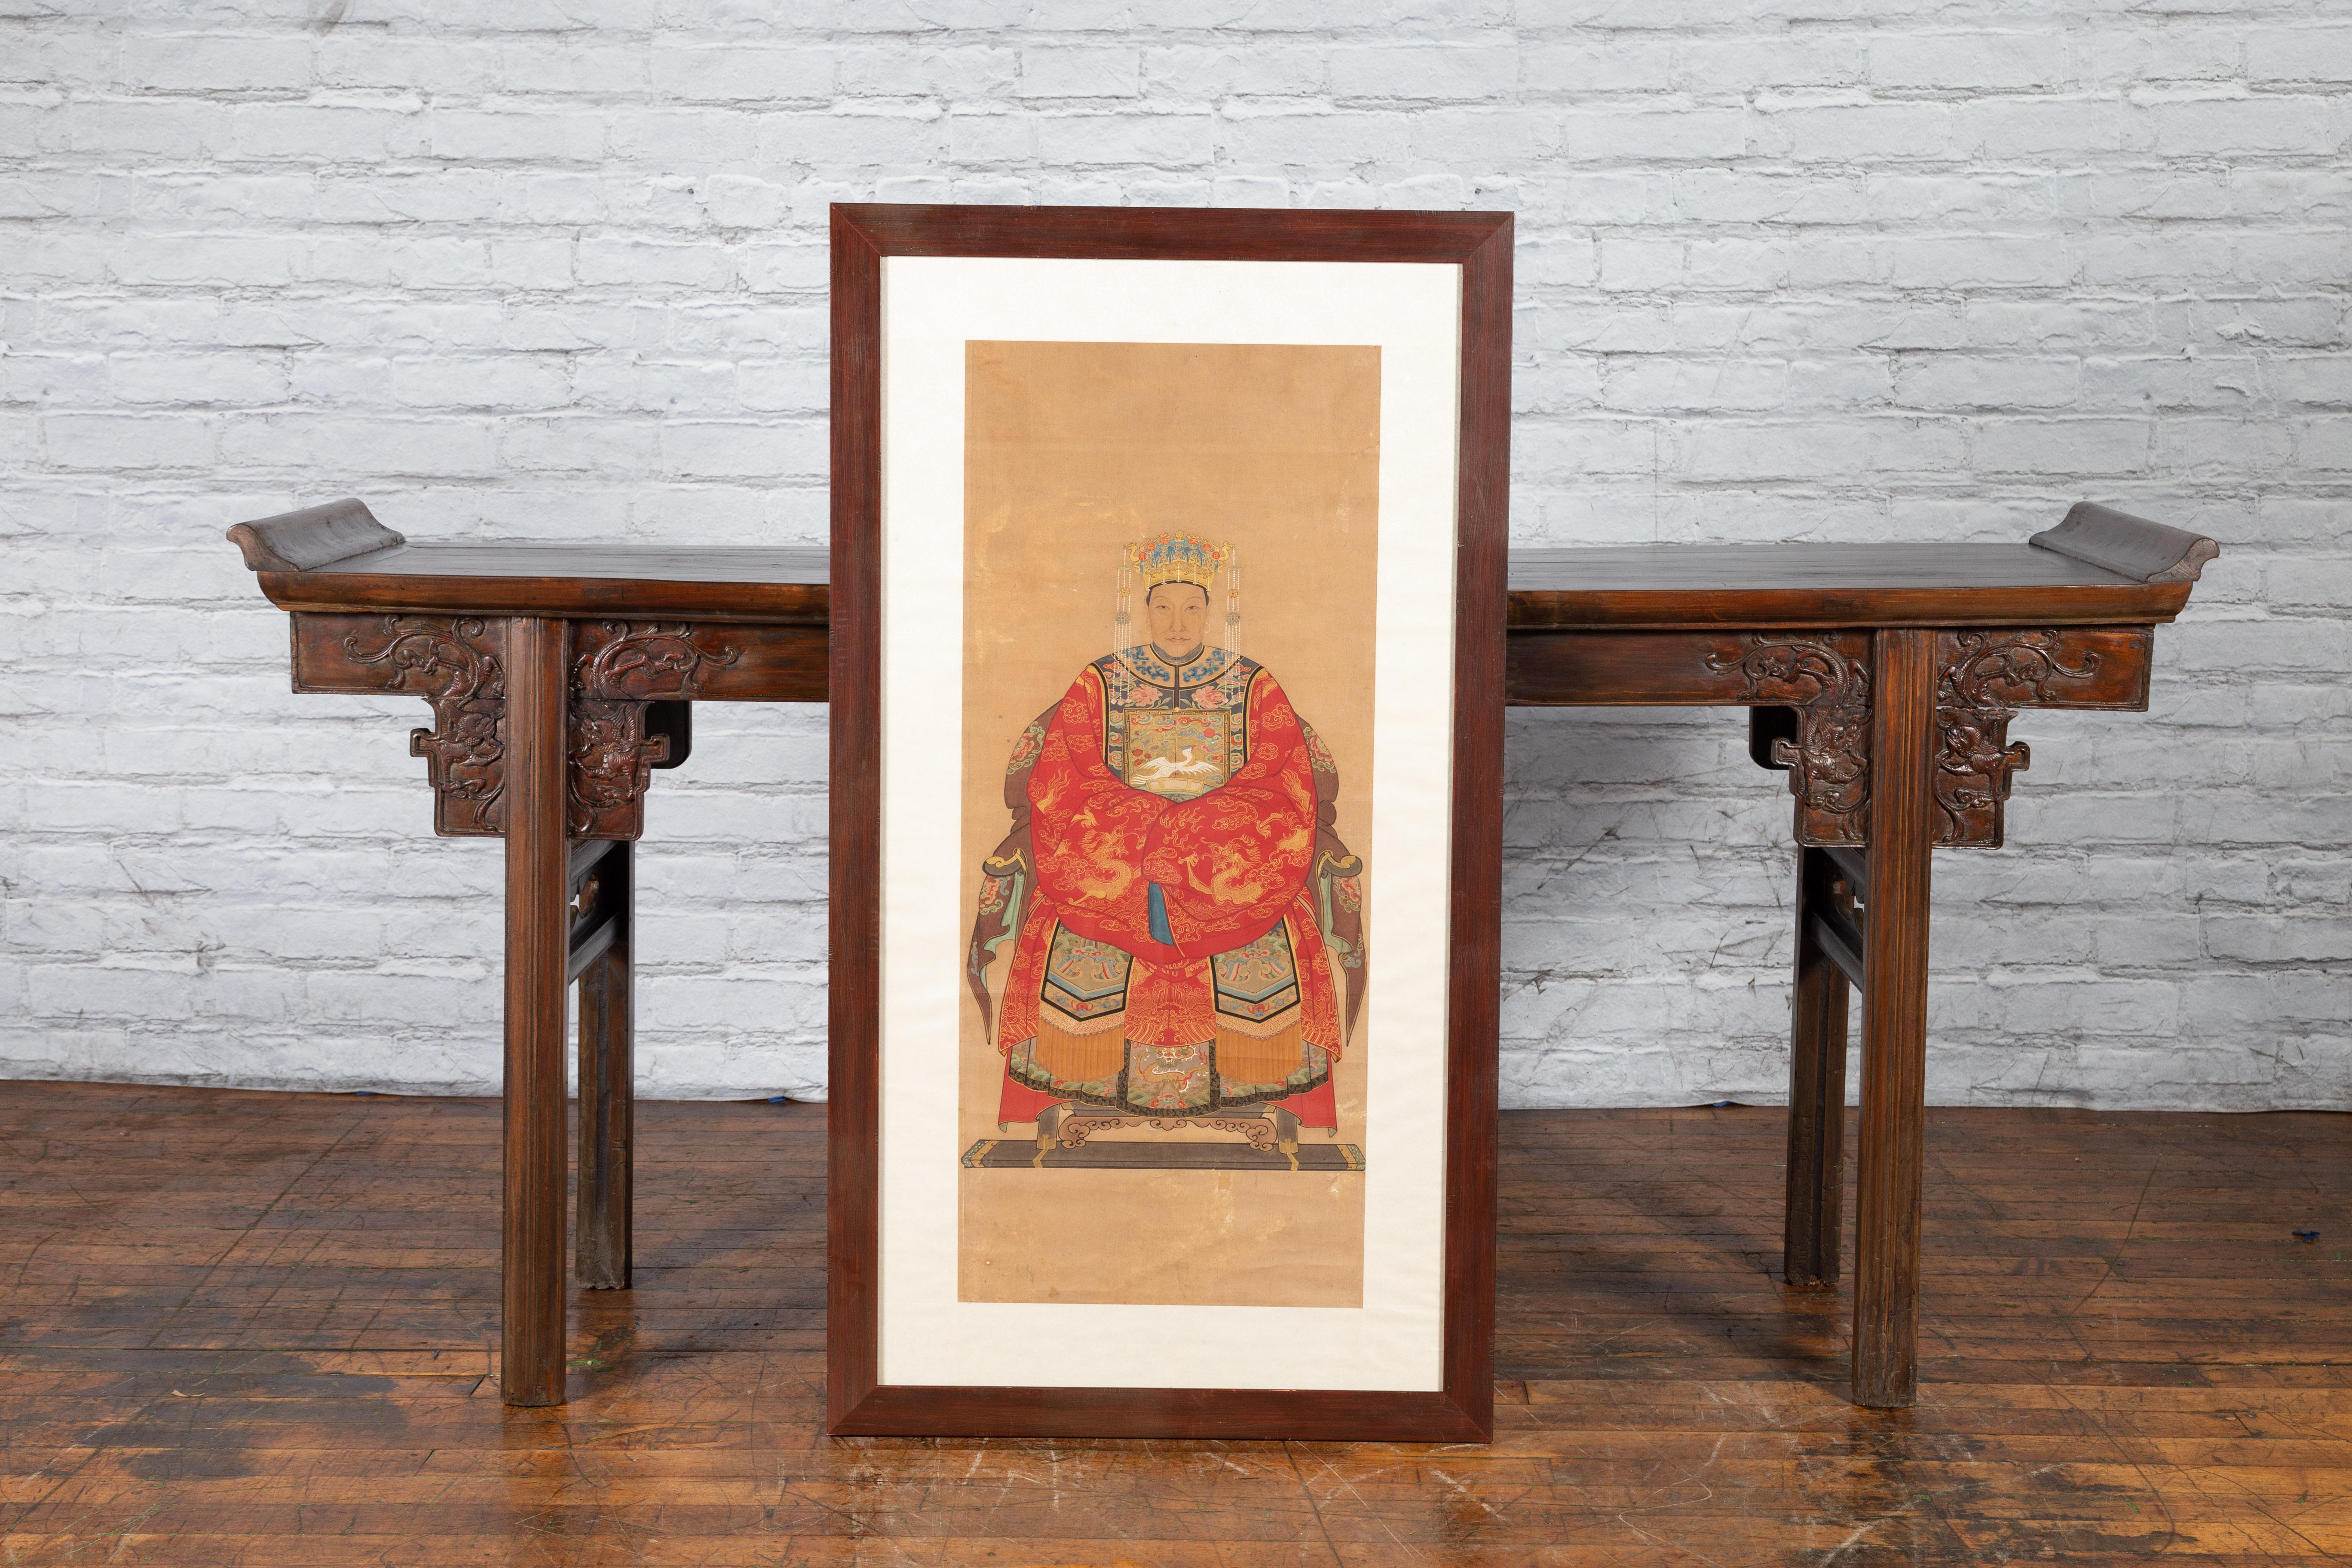 A Chinese Qing Dynasty period framed painting from the 19th century of an official's wife with bird-adorned buzi, painted on a linen canvas. Created in the North-Eastern province of Shanxi during the Qing dynasty, this 19th century painting